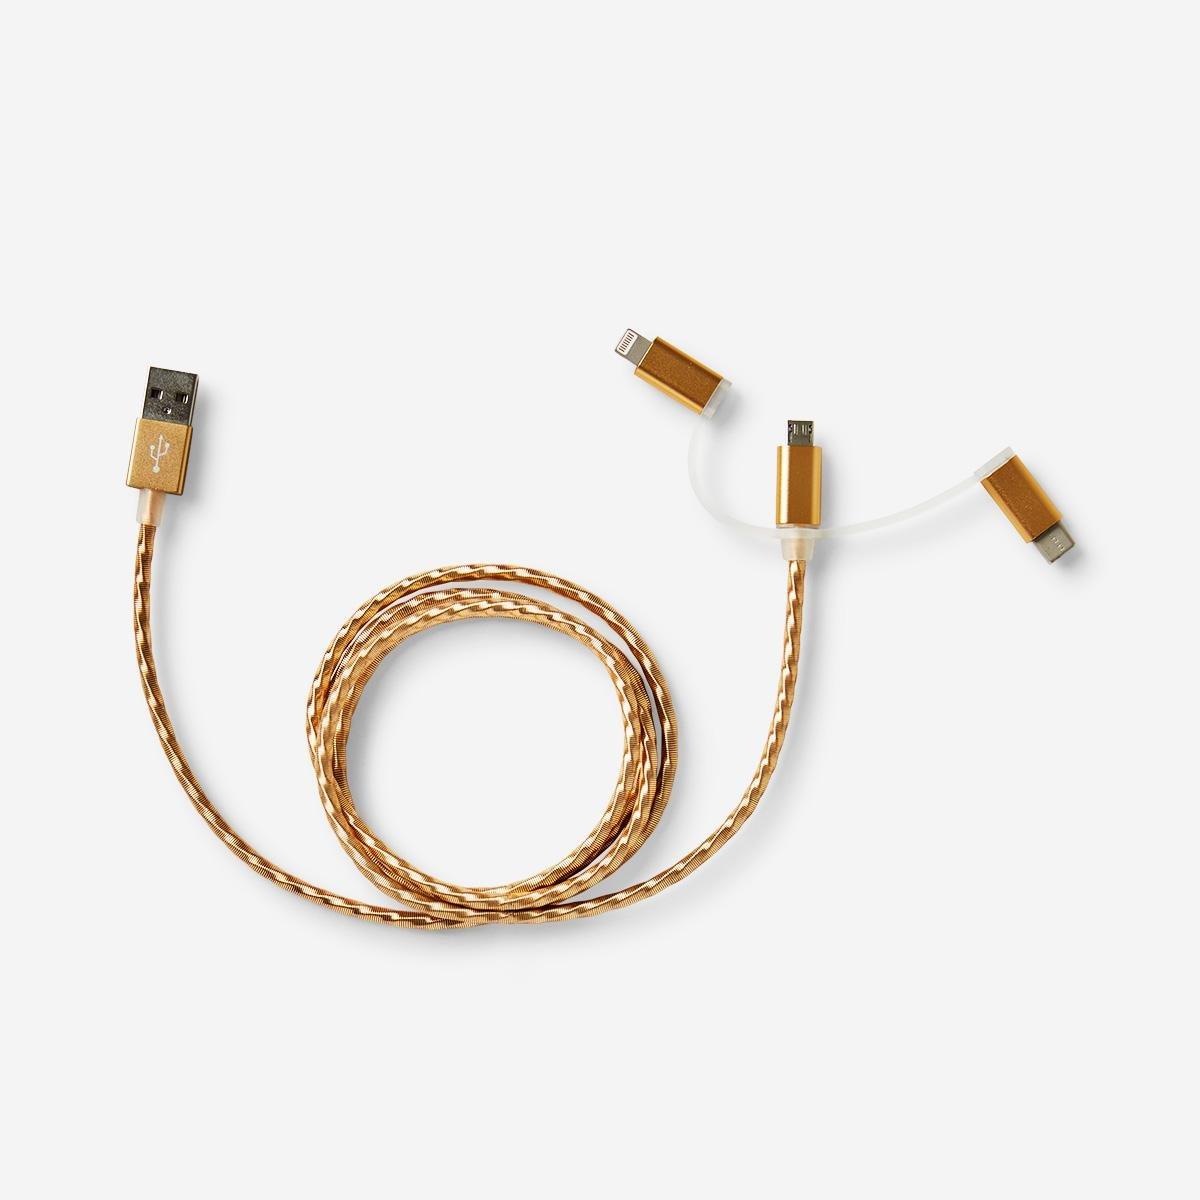 Gold multi-charging cable